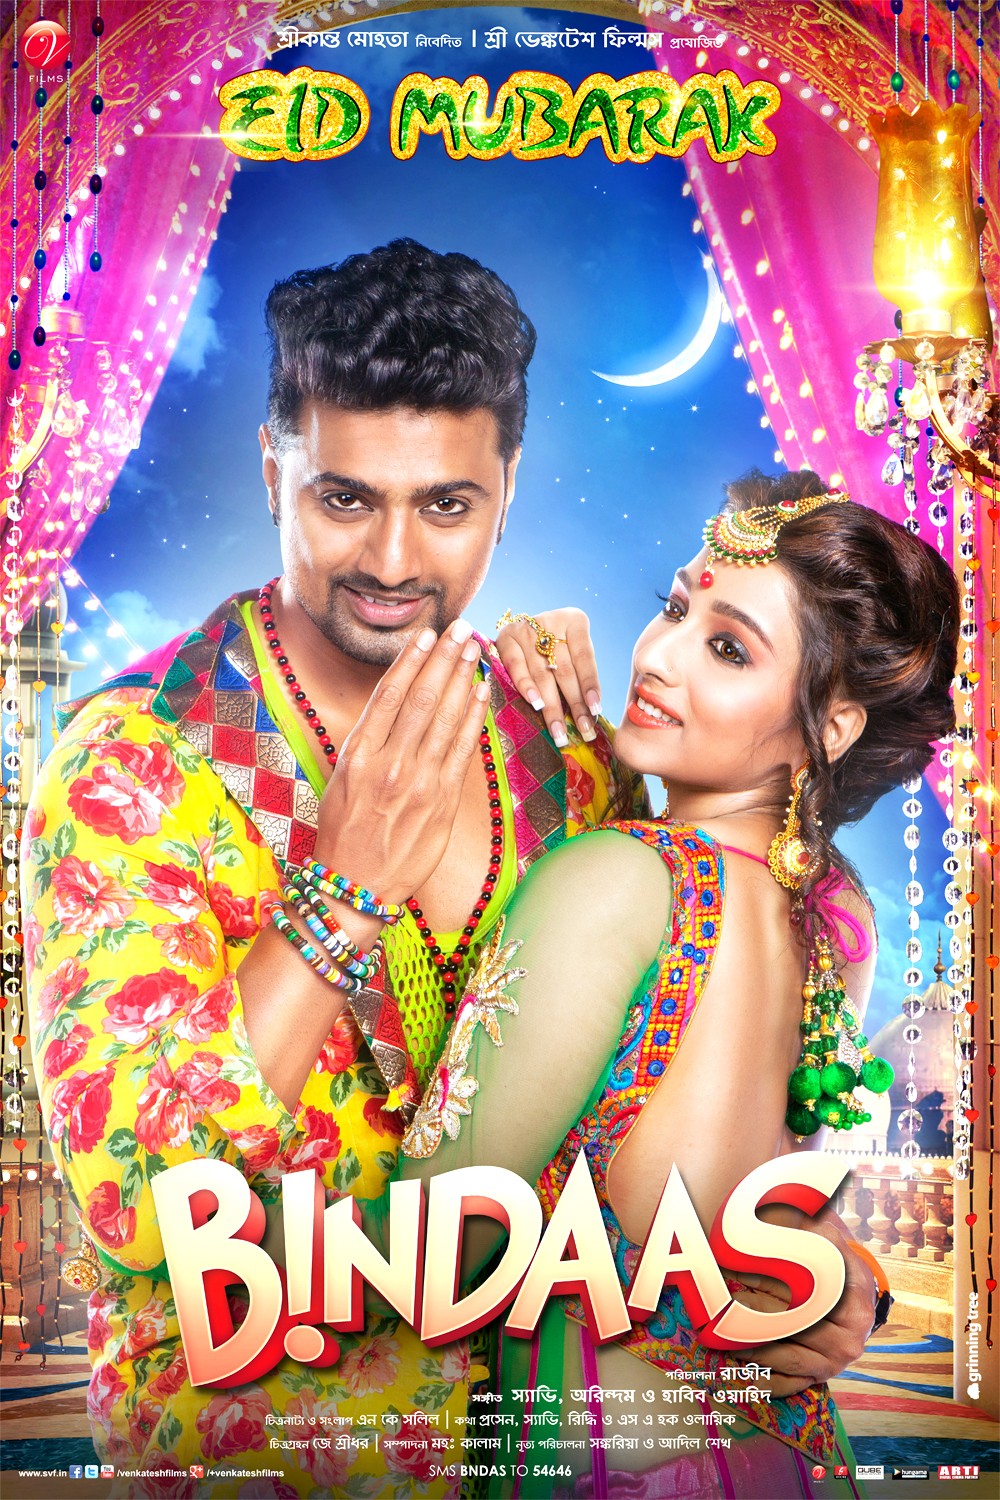 Extra Large Movie Poster Image for Bindaas (#5 of 7)